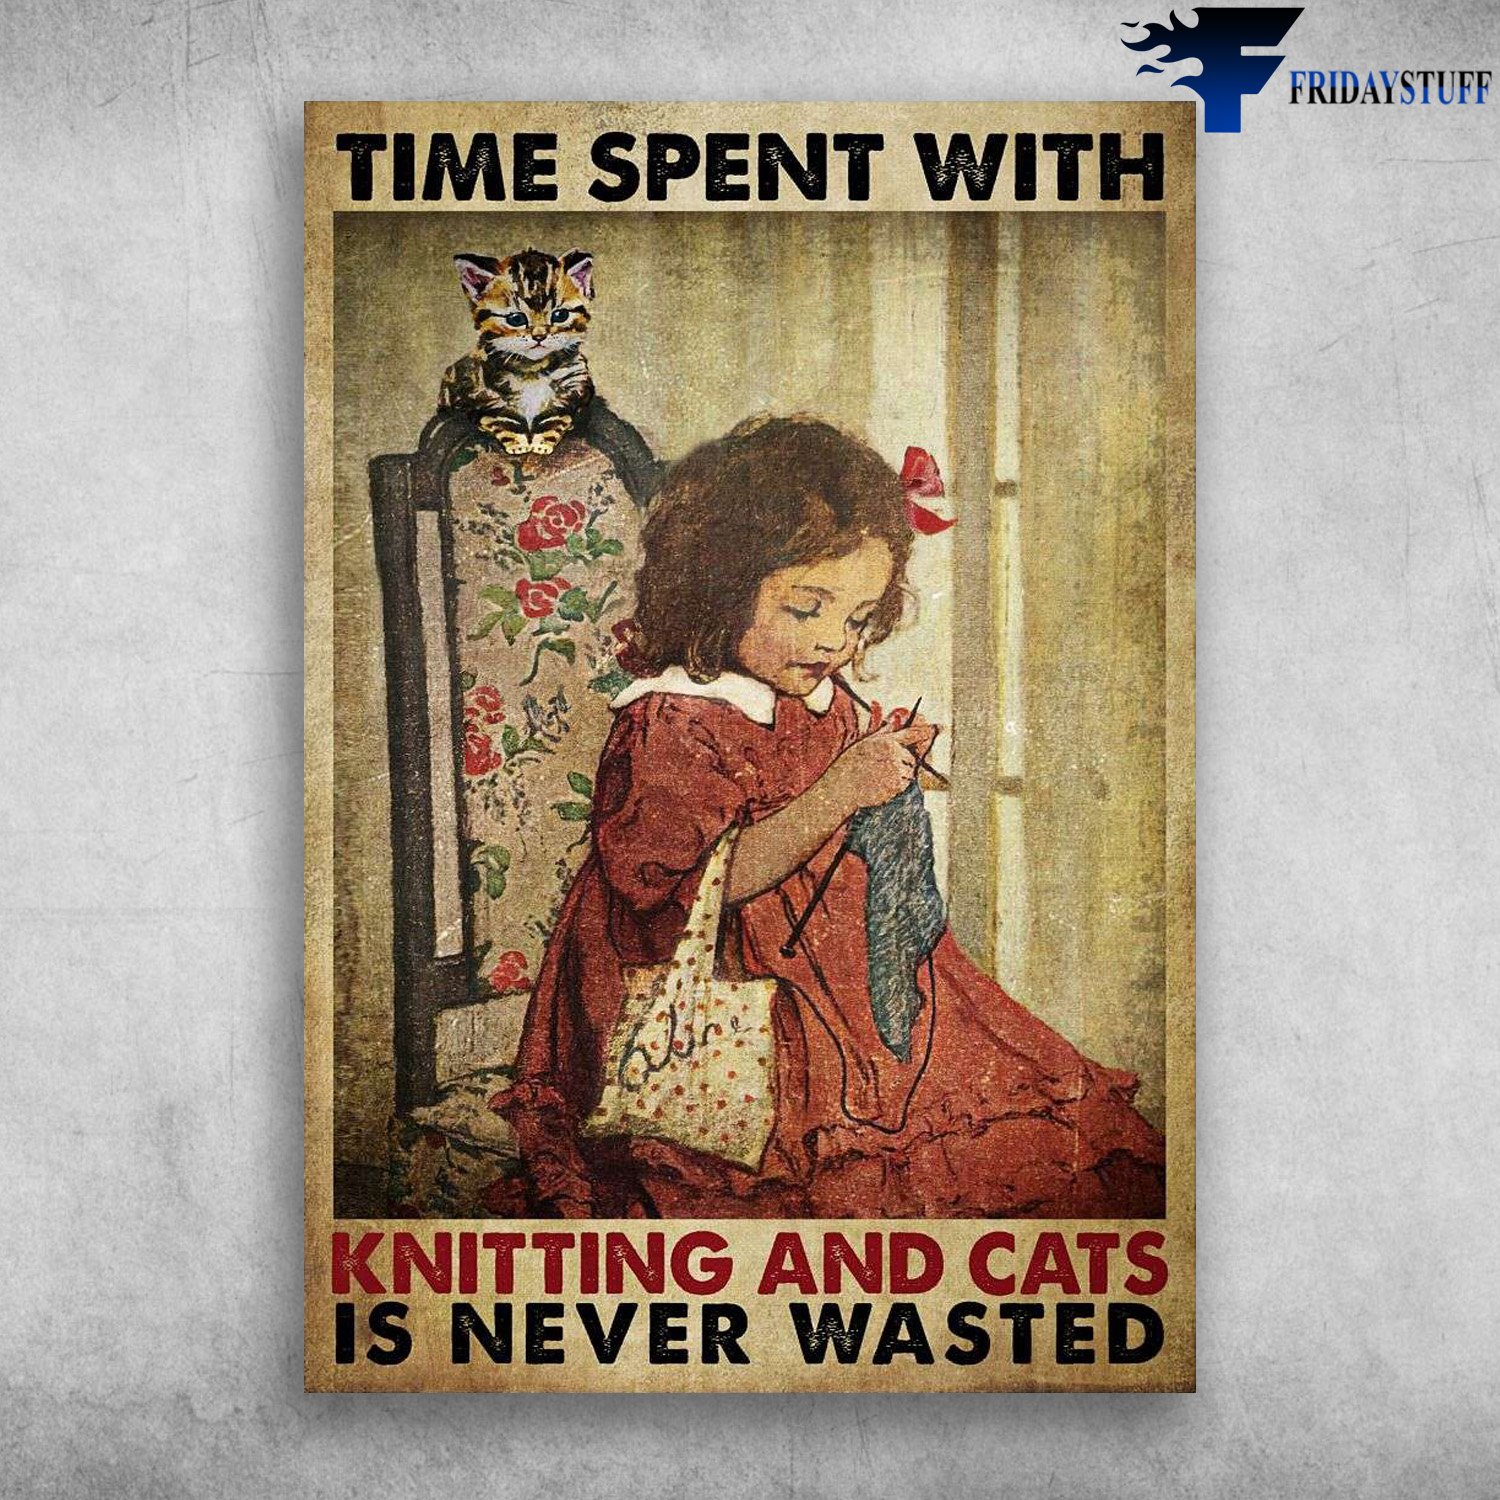 Little Girl Knitting - Time Spent With, Knitting And Cats, Is Never Wasted